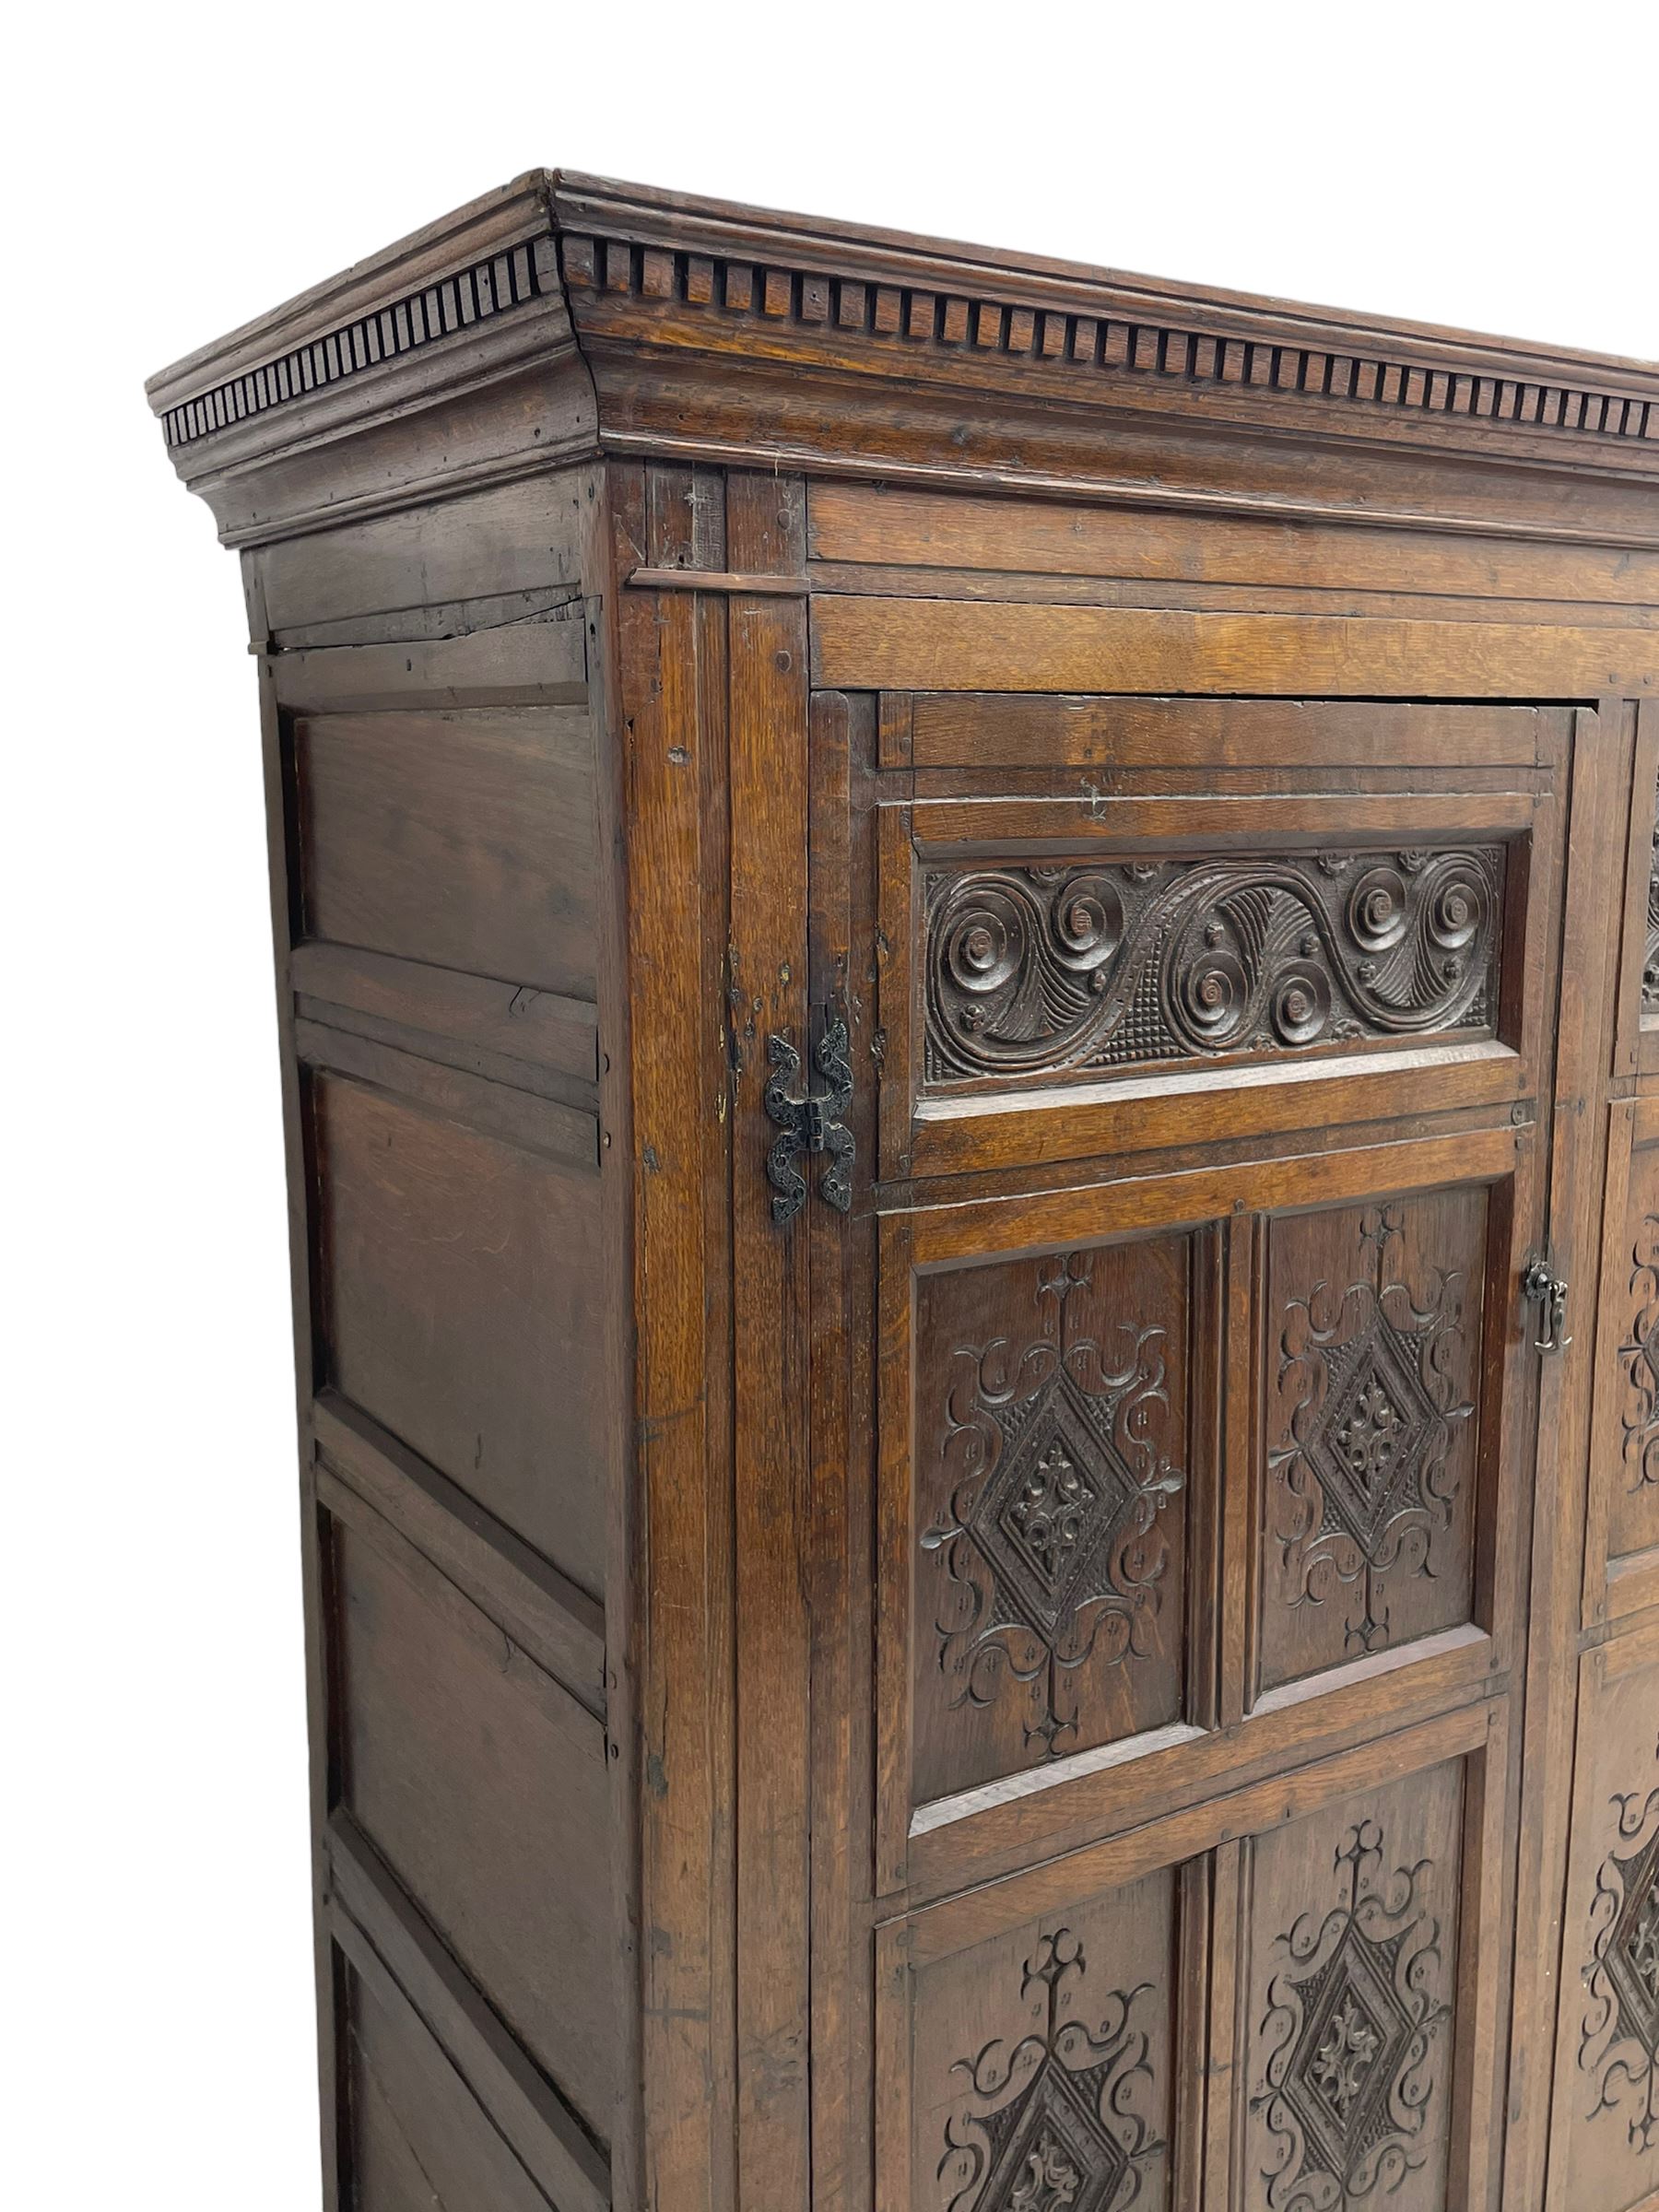 Large 18th century and later oak livery cupboard - Image 3 of 10